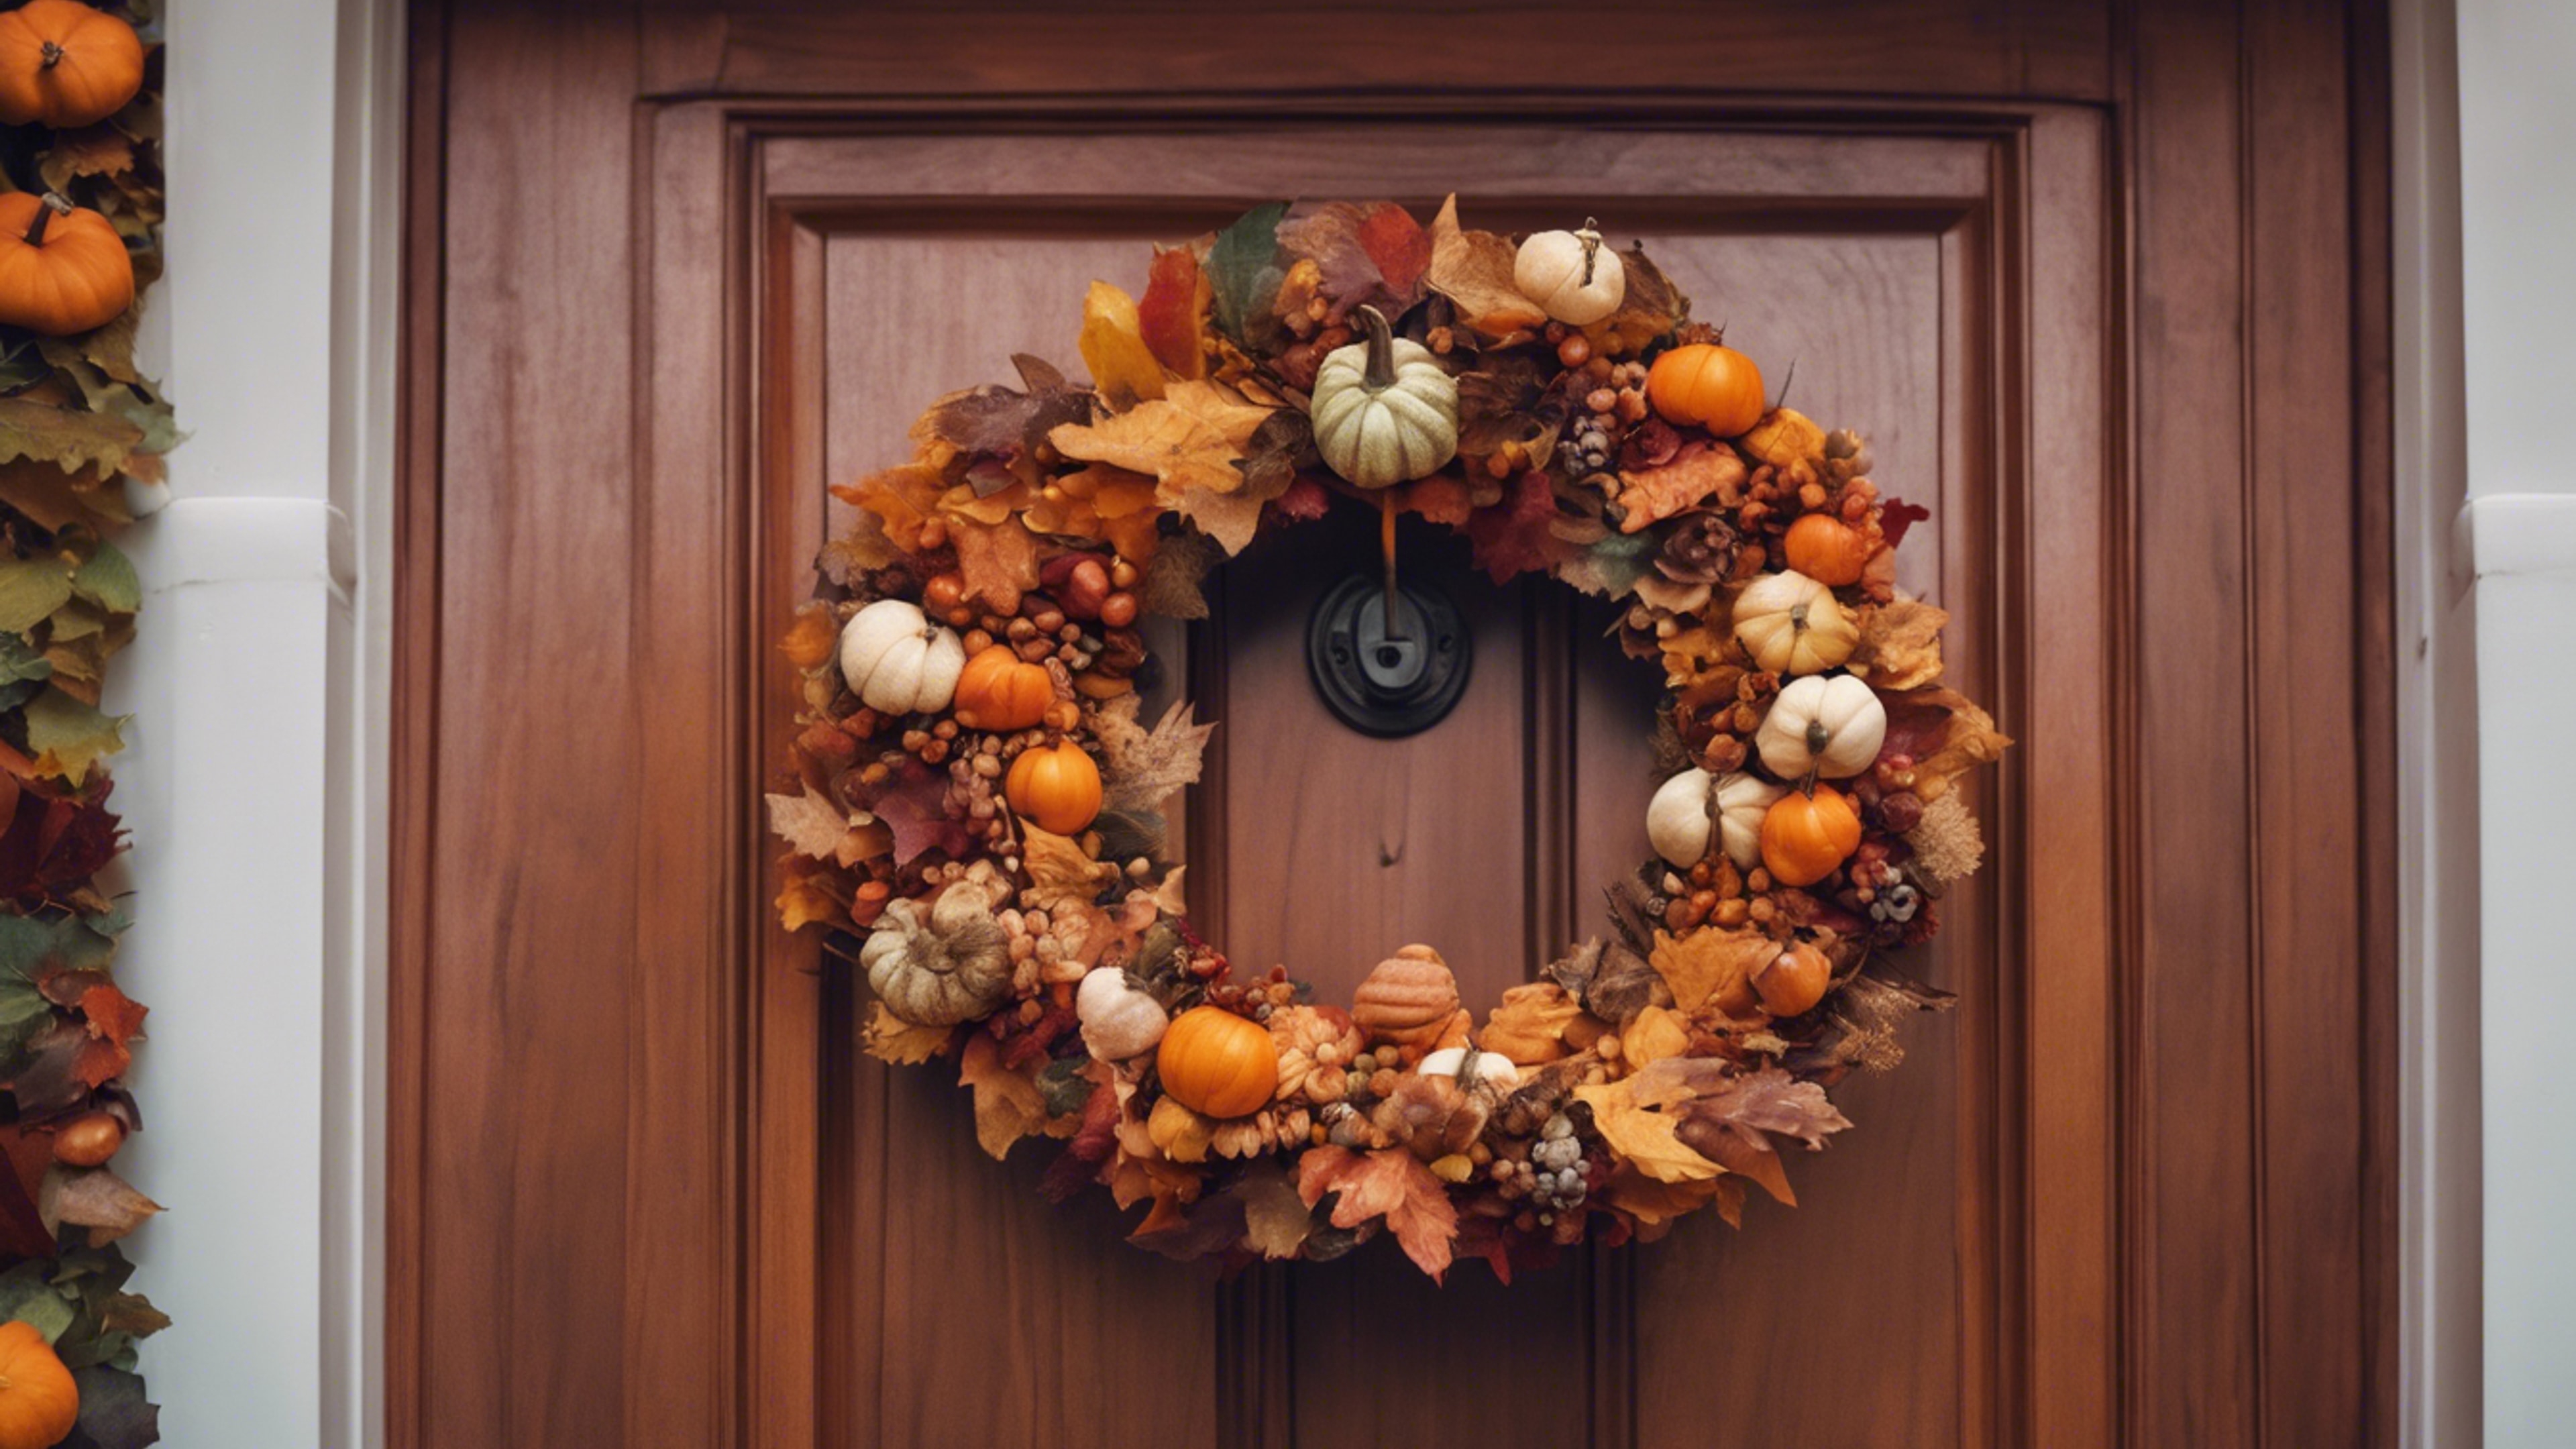 A festive autumn wreath made of colorful fall leaves and miniature pumpkins hanging elegantly on a mahogany door, signaling the start of the Thanksgiving holiday. วอลล์เปเปอร์[f1a39b05ecd5476686a3]